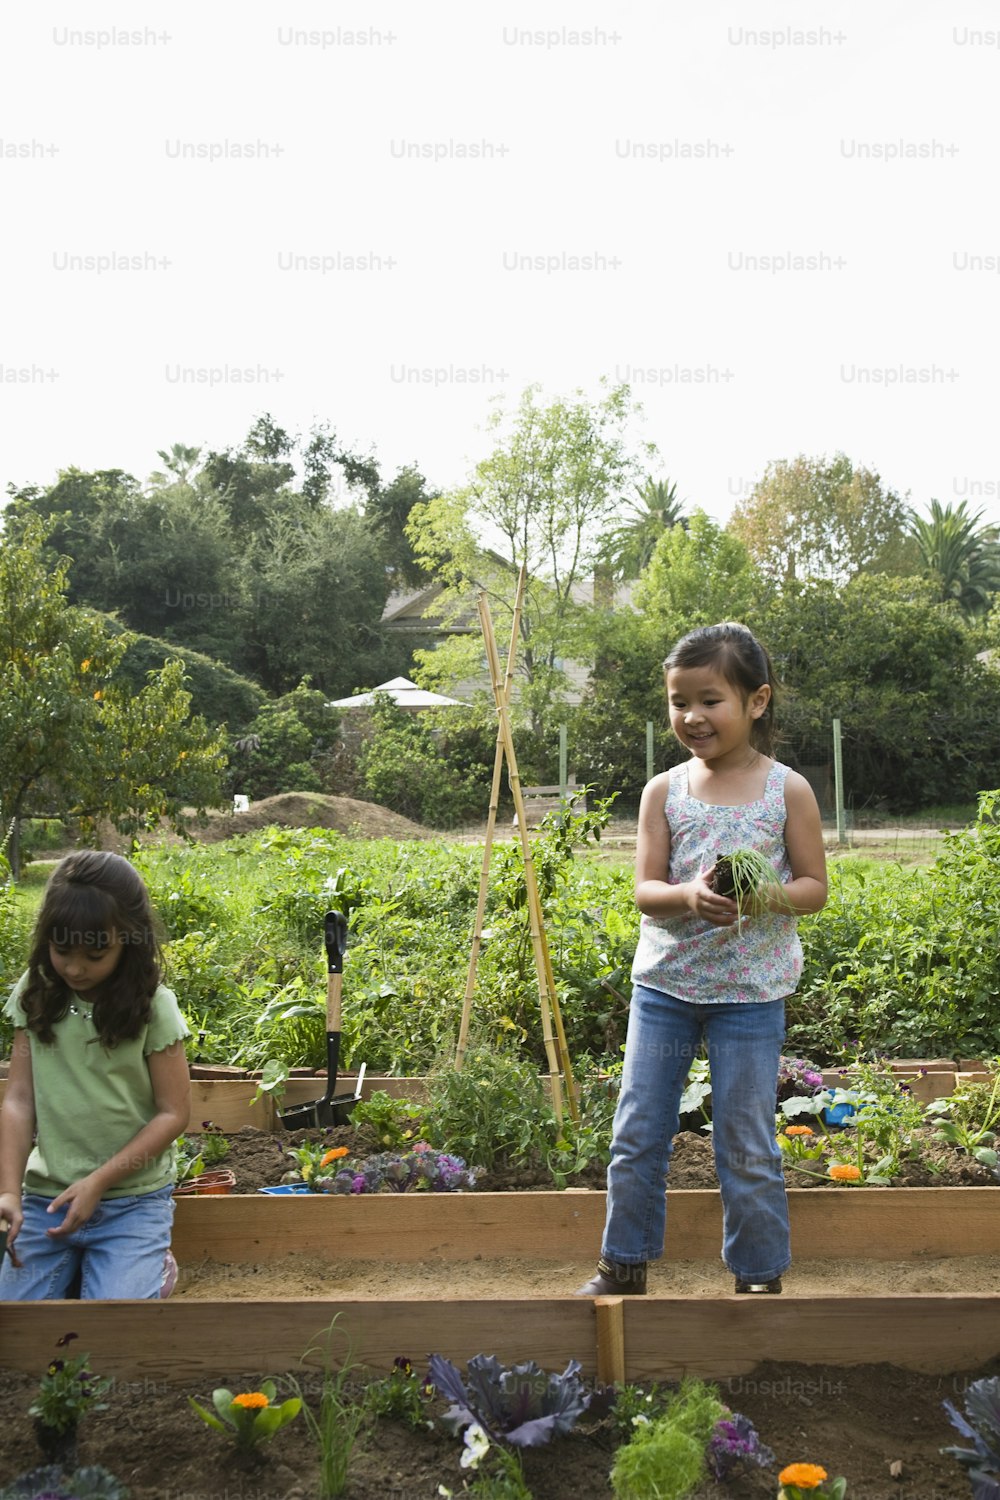 two young girls are standing in a garden